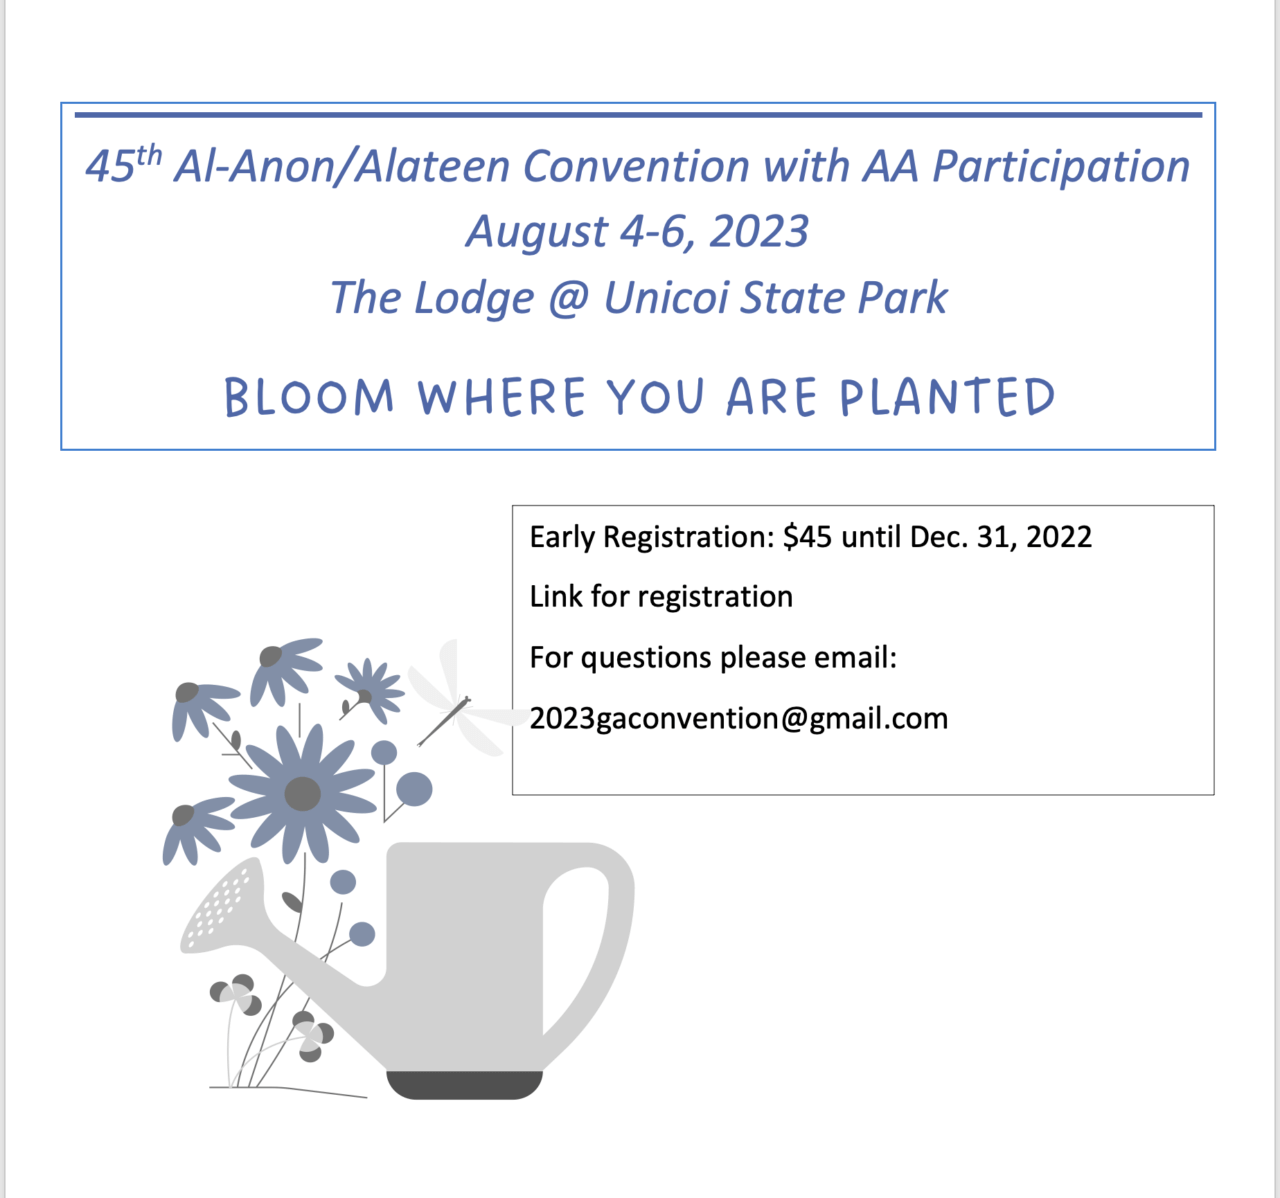 The 45th AlAnon Alateen Convention with AA Participation Aug 4